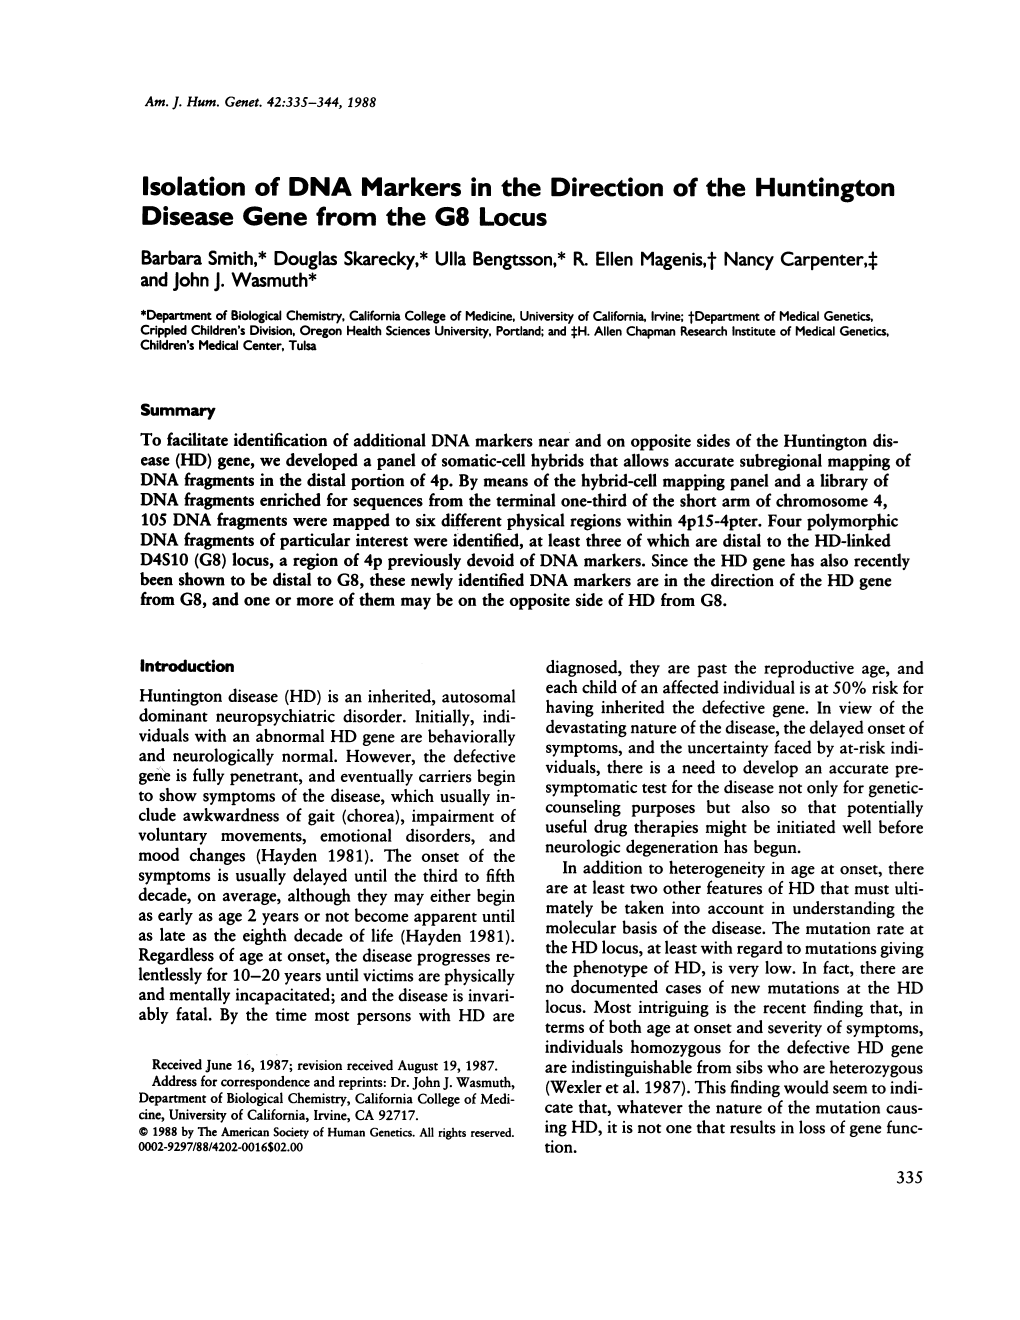 Isolation of DNA Markers in the Direction of the Huntington Disease Gene from the G8 Locus